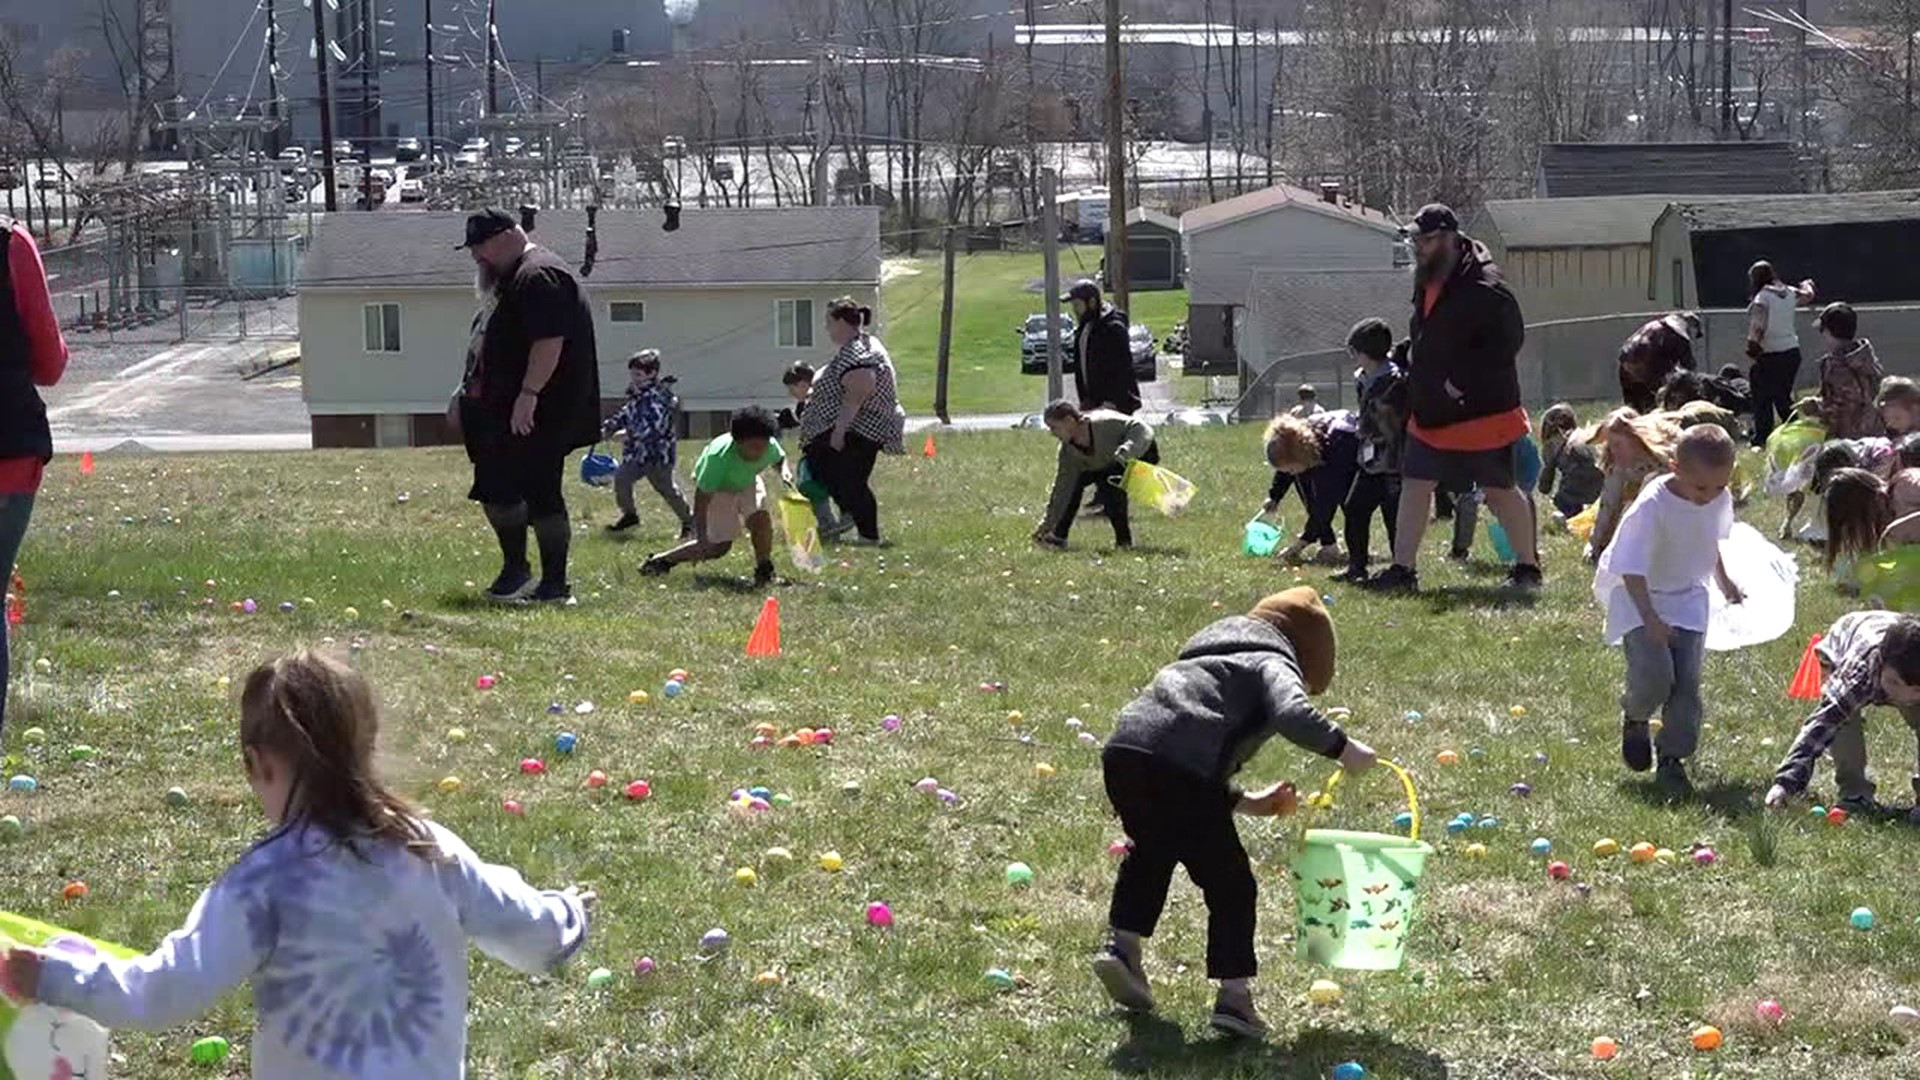 Easter festivities are underway in Clinton County. 
The county's housing authority held a free Easter egg hunt today for their tenants.